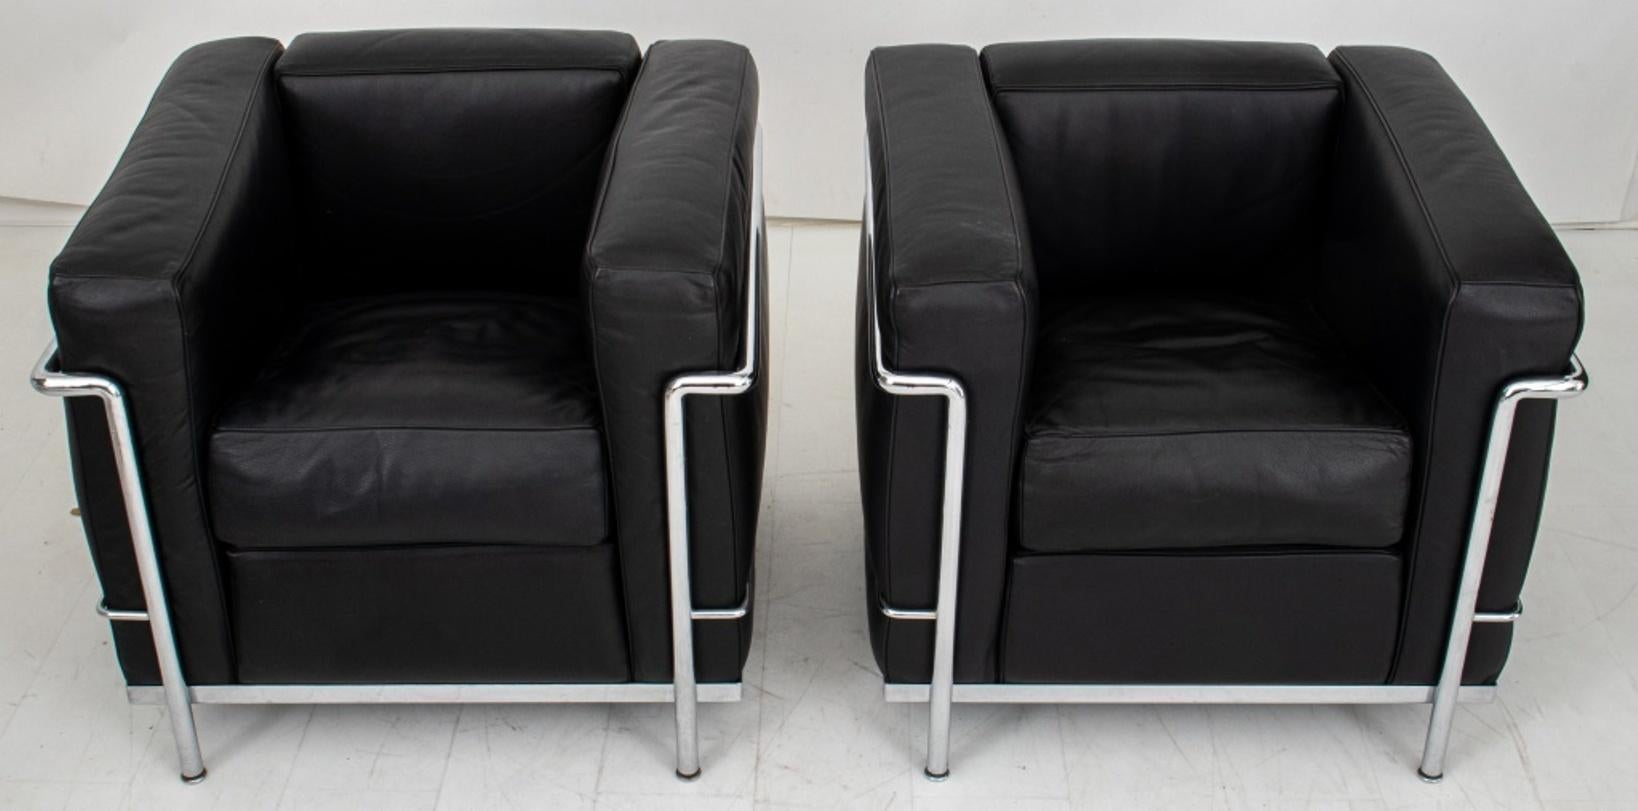 Cassina Le Corbusier (Swiss-French, 1887-1965) LC2 Easy Chairs (Fauteuil Grand Confort), a pair, 2, designed 1928, 1990s, of typical form with black leather and chrome fittings.

Dimensions:   26